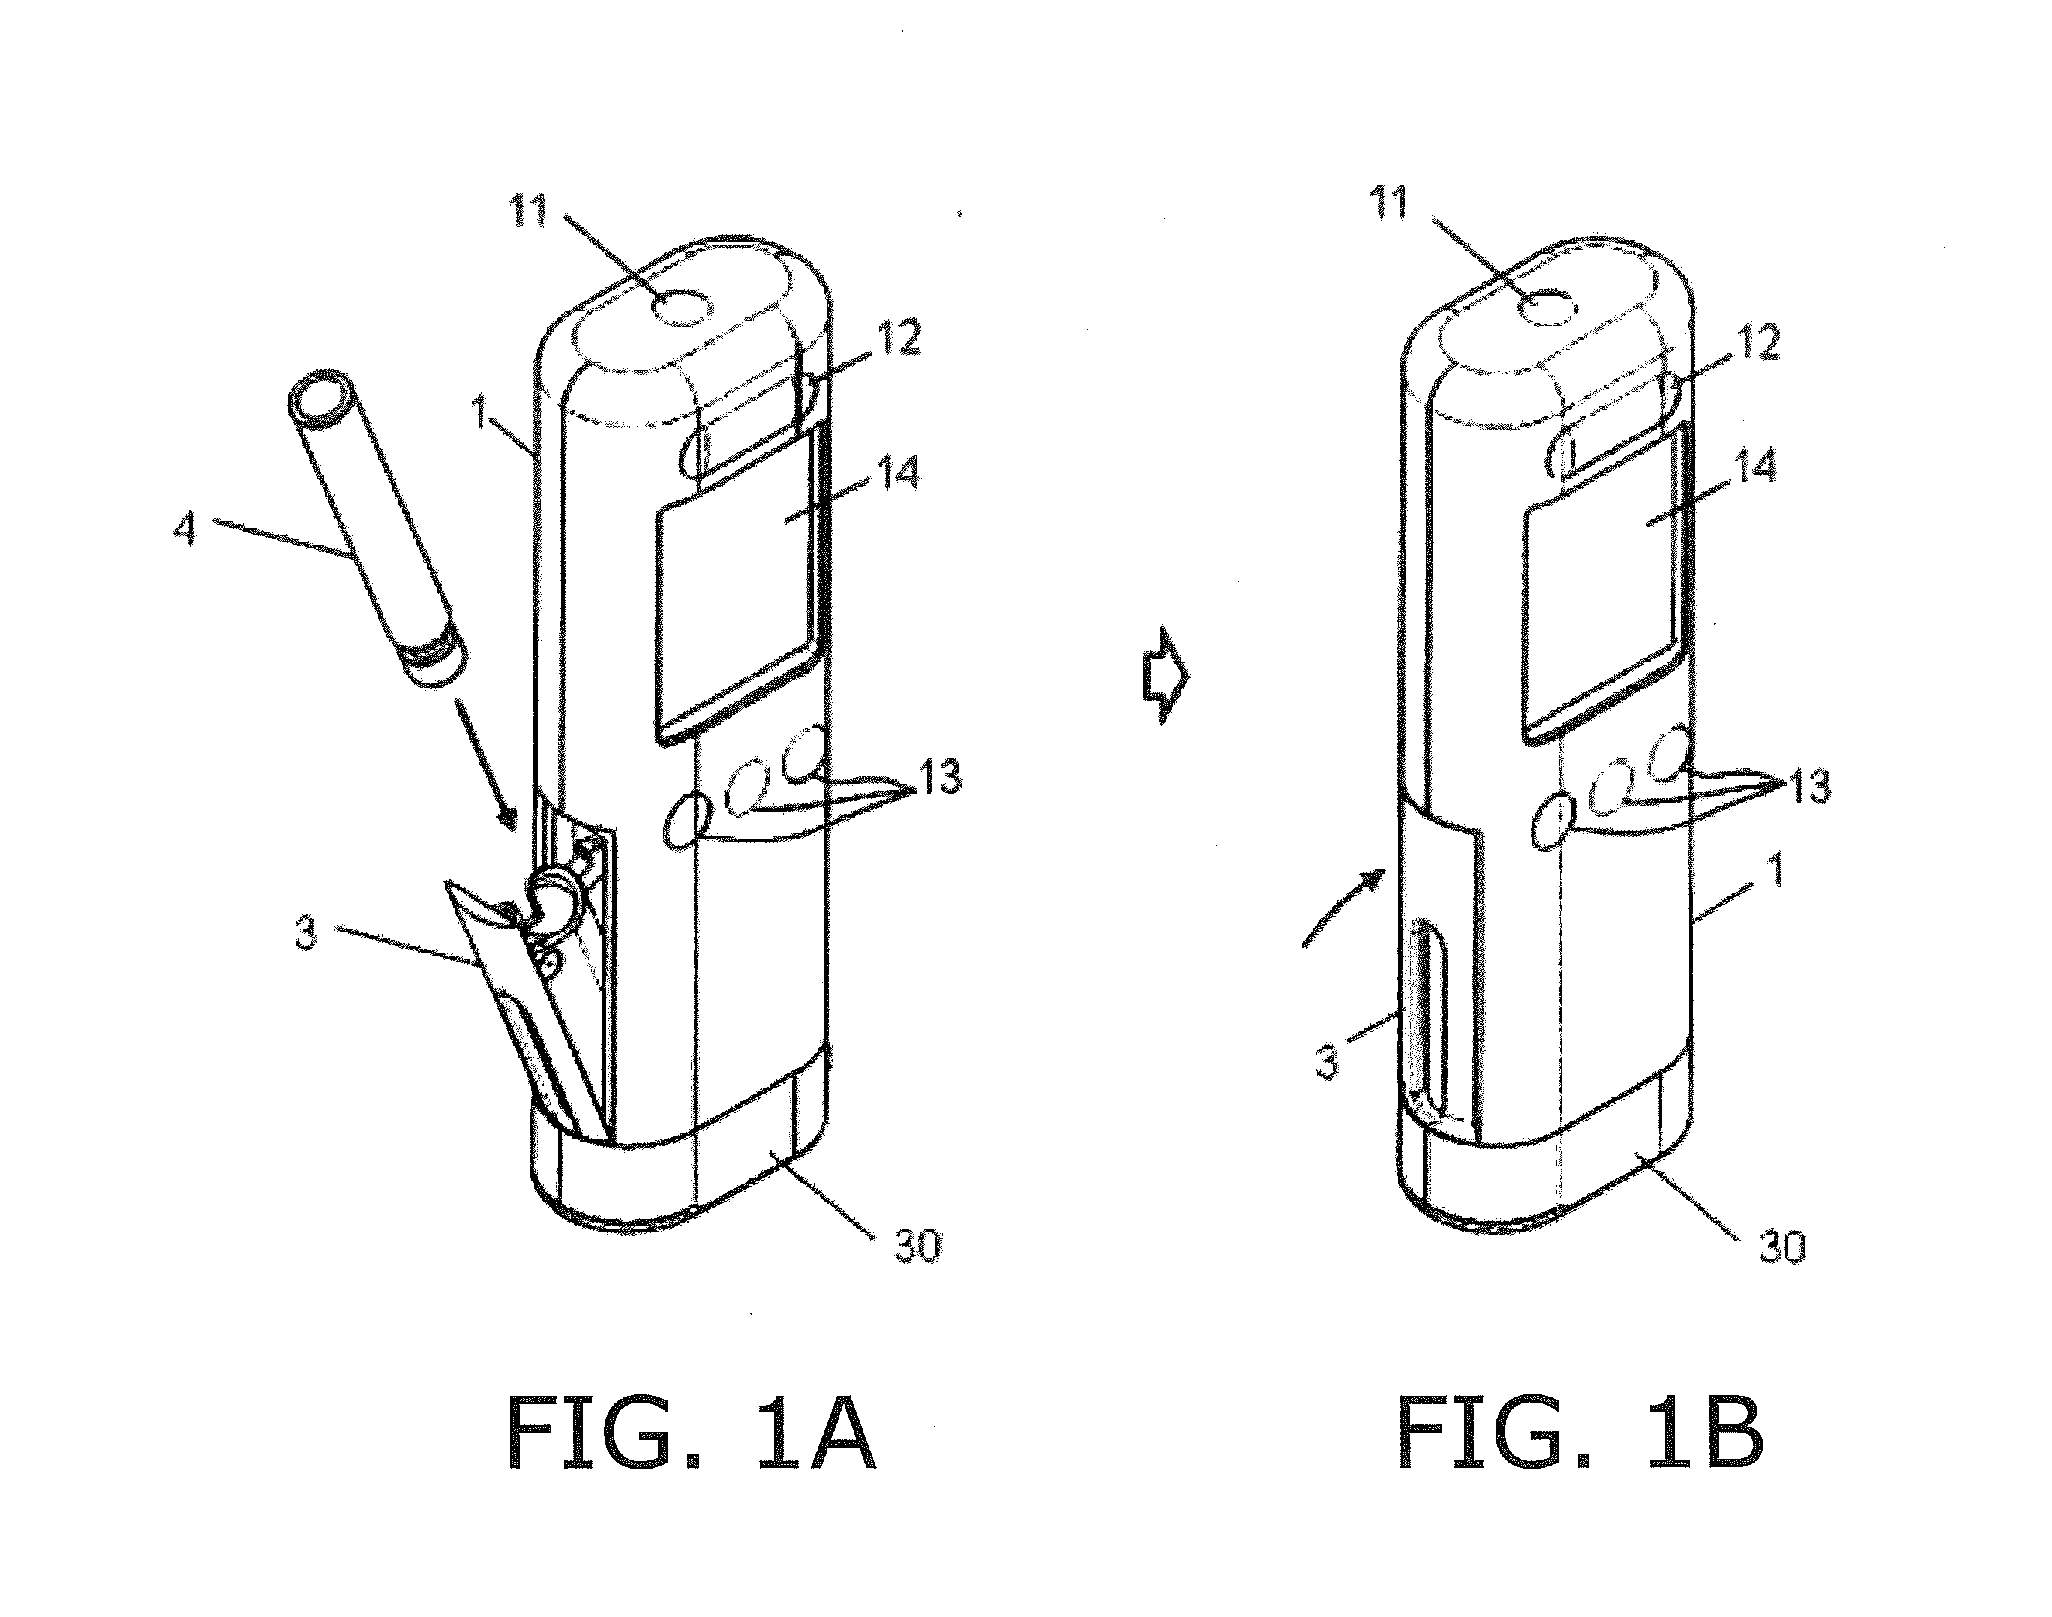 Pharmaceutical injection device